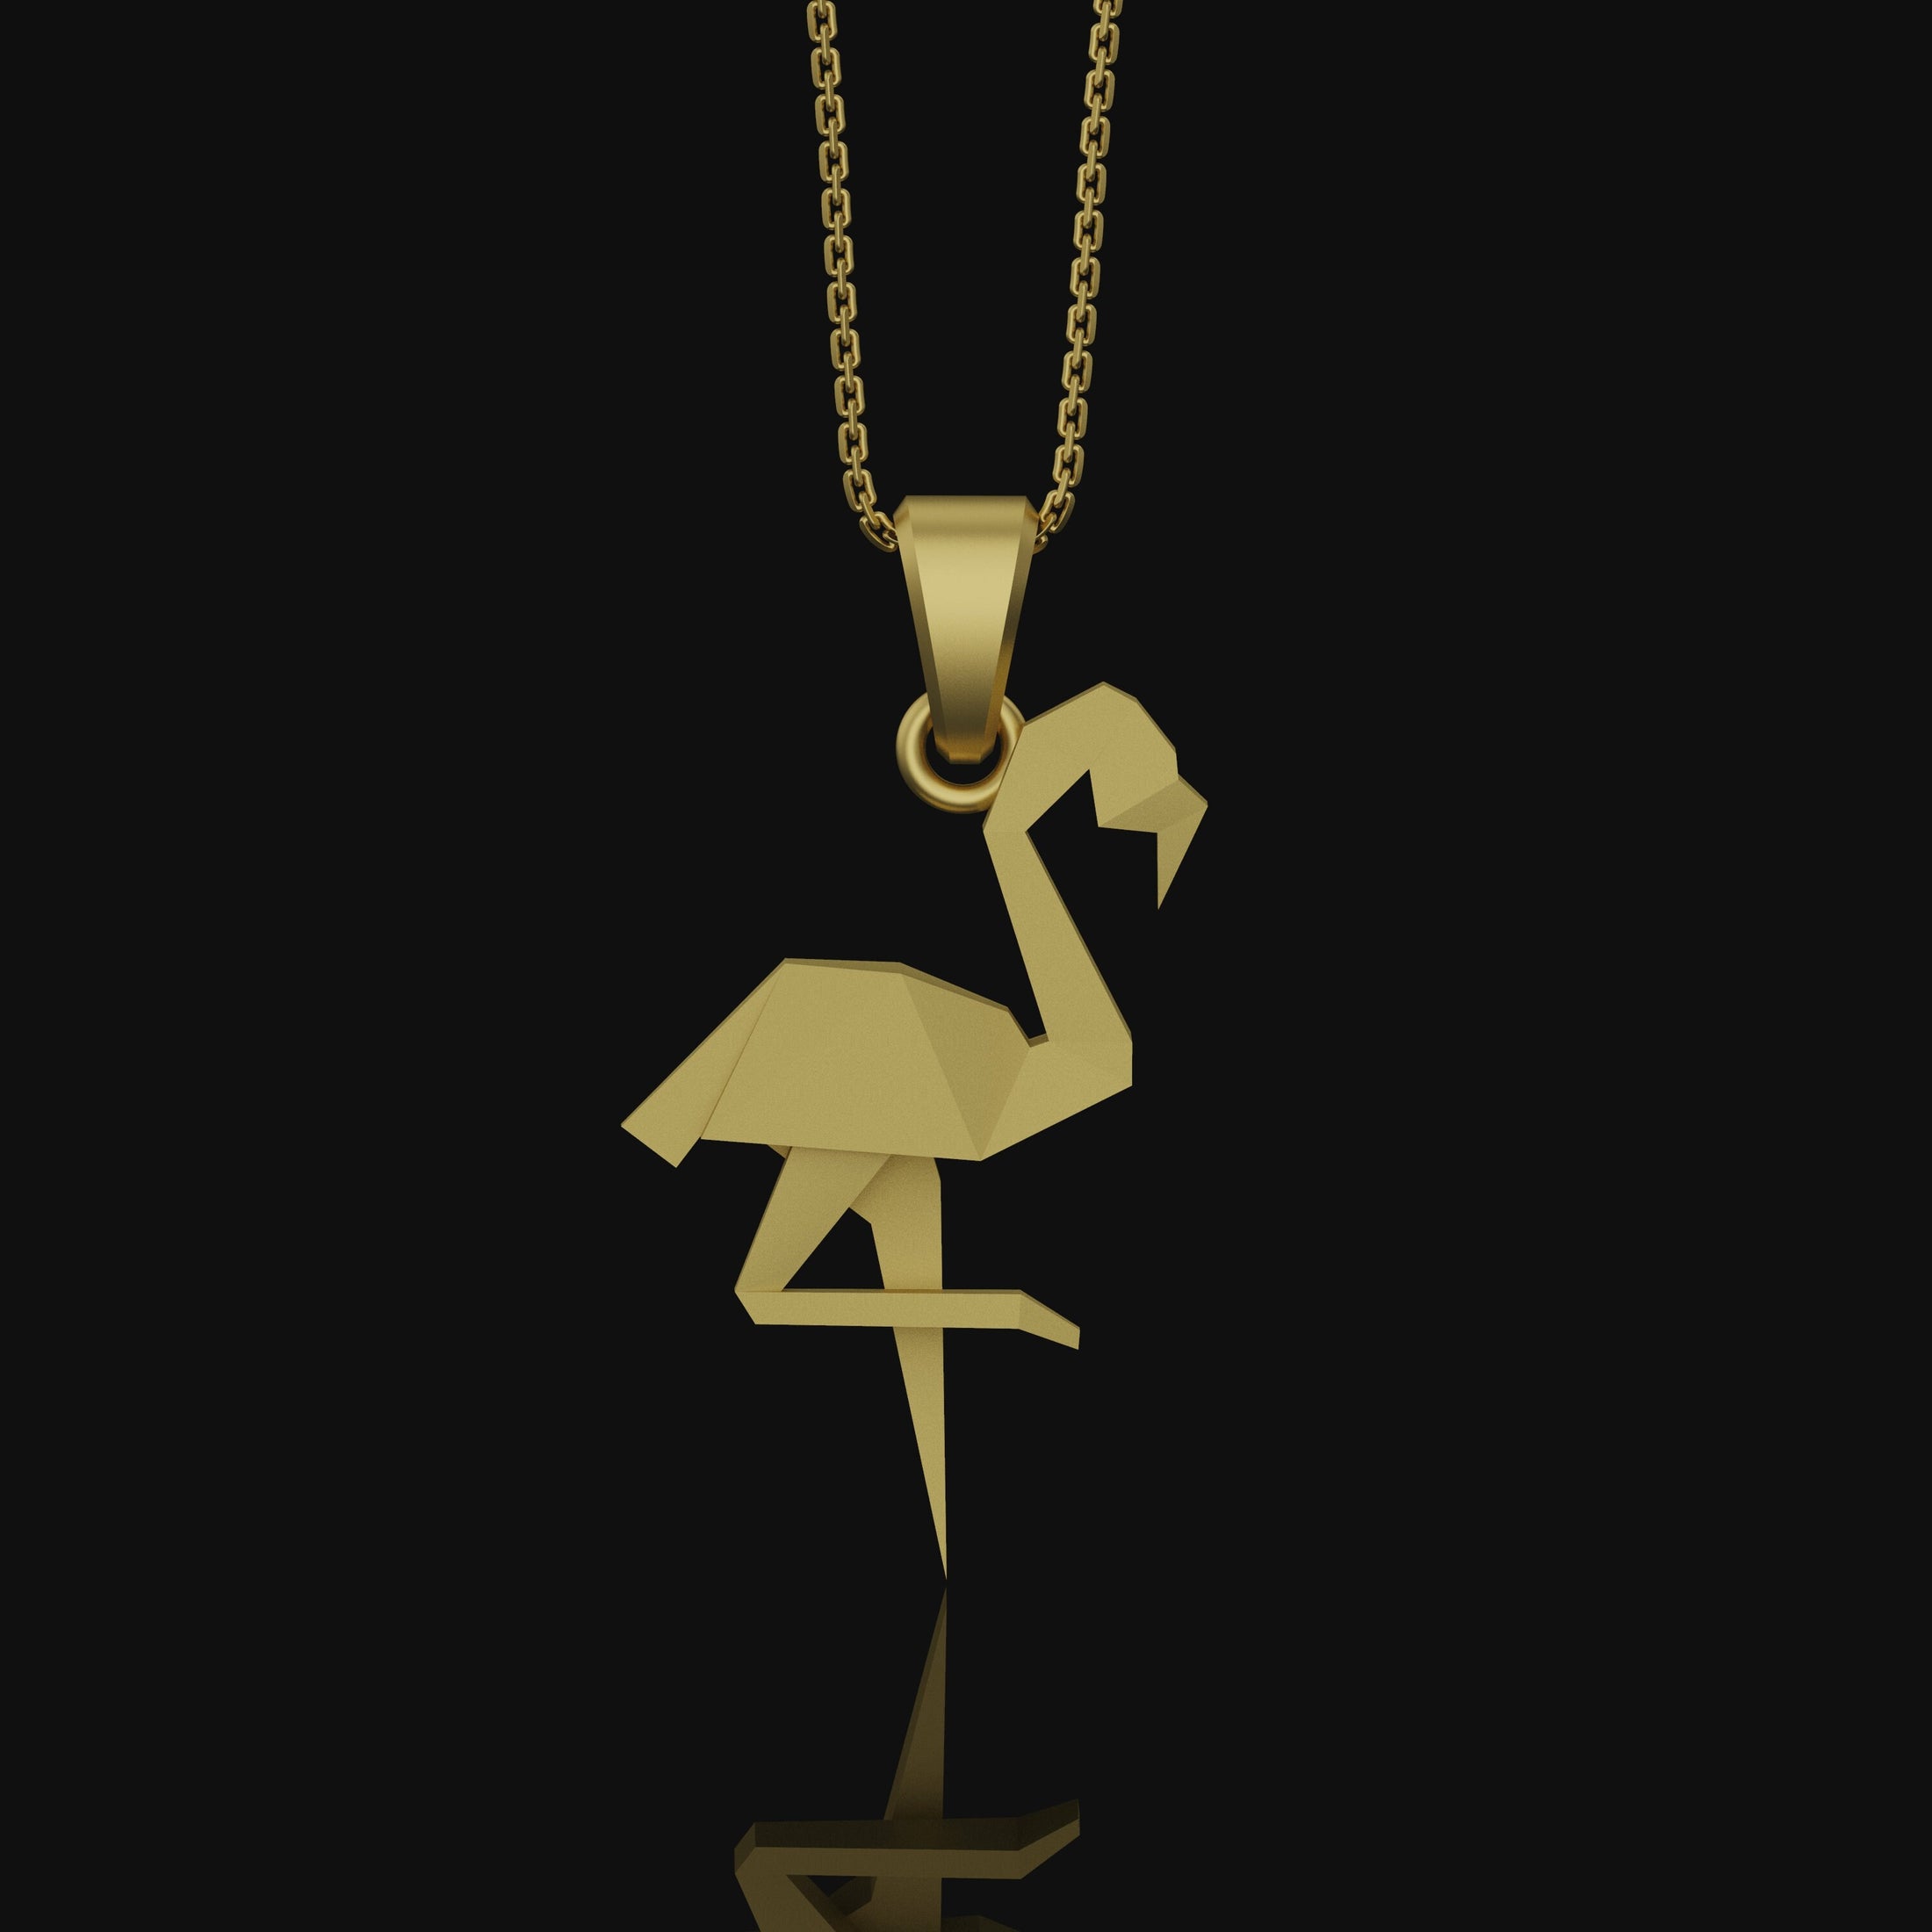 Silver Origami Flamingo Necklace Gift for her, Geometric Necklace, Bird Charm, Flamingo Pendant, Christmas Gift, Origami Animal Gold Matte